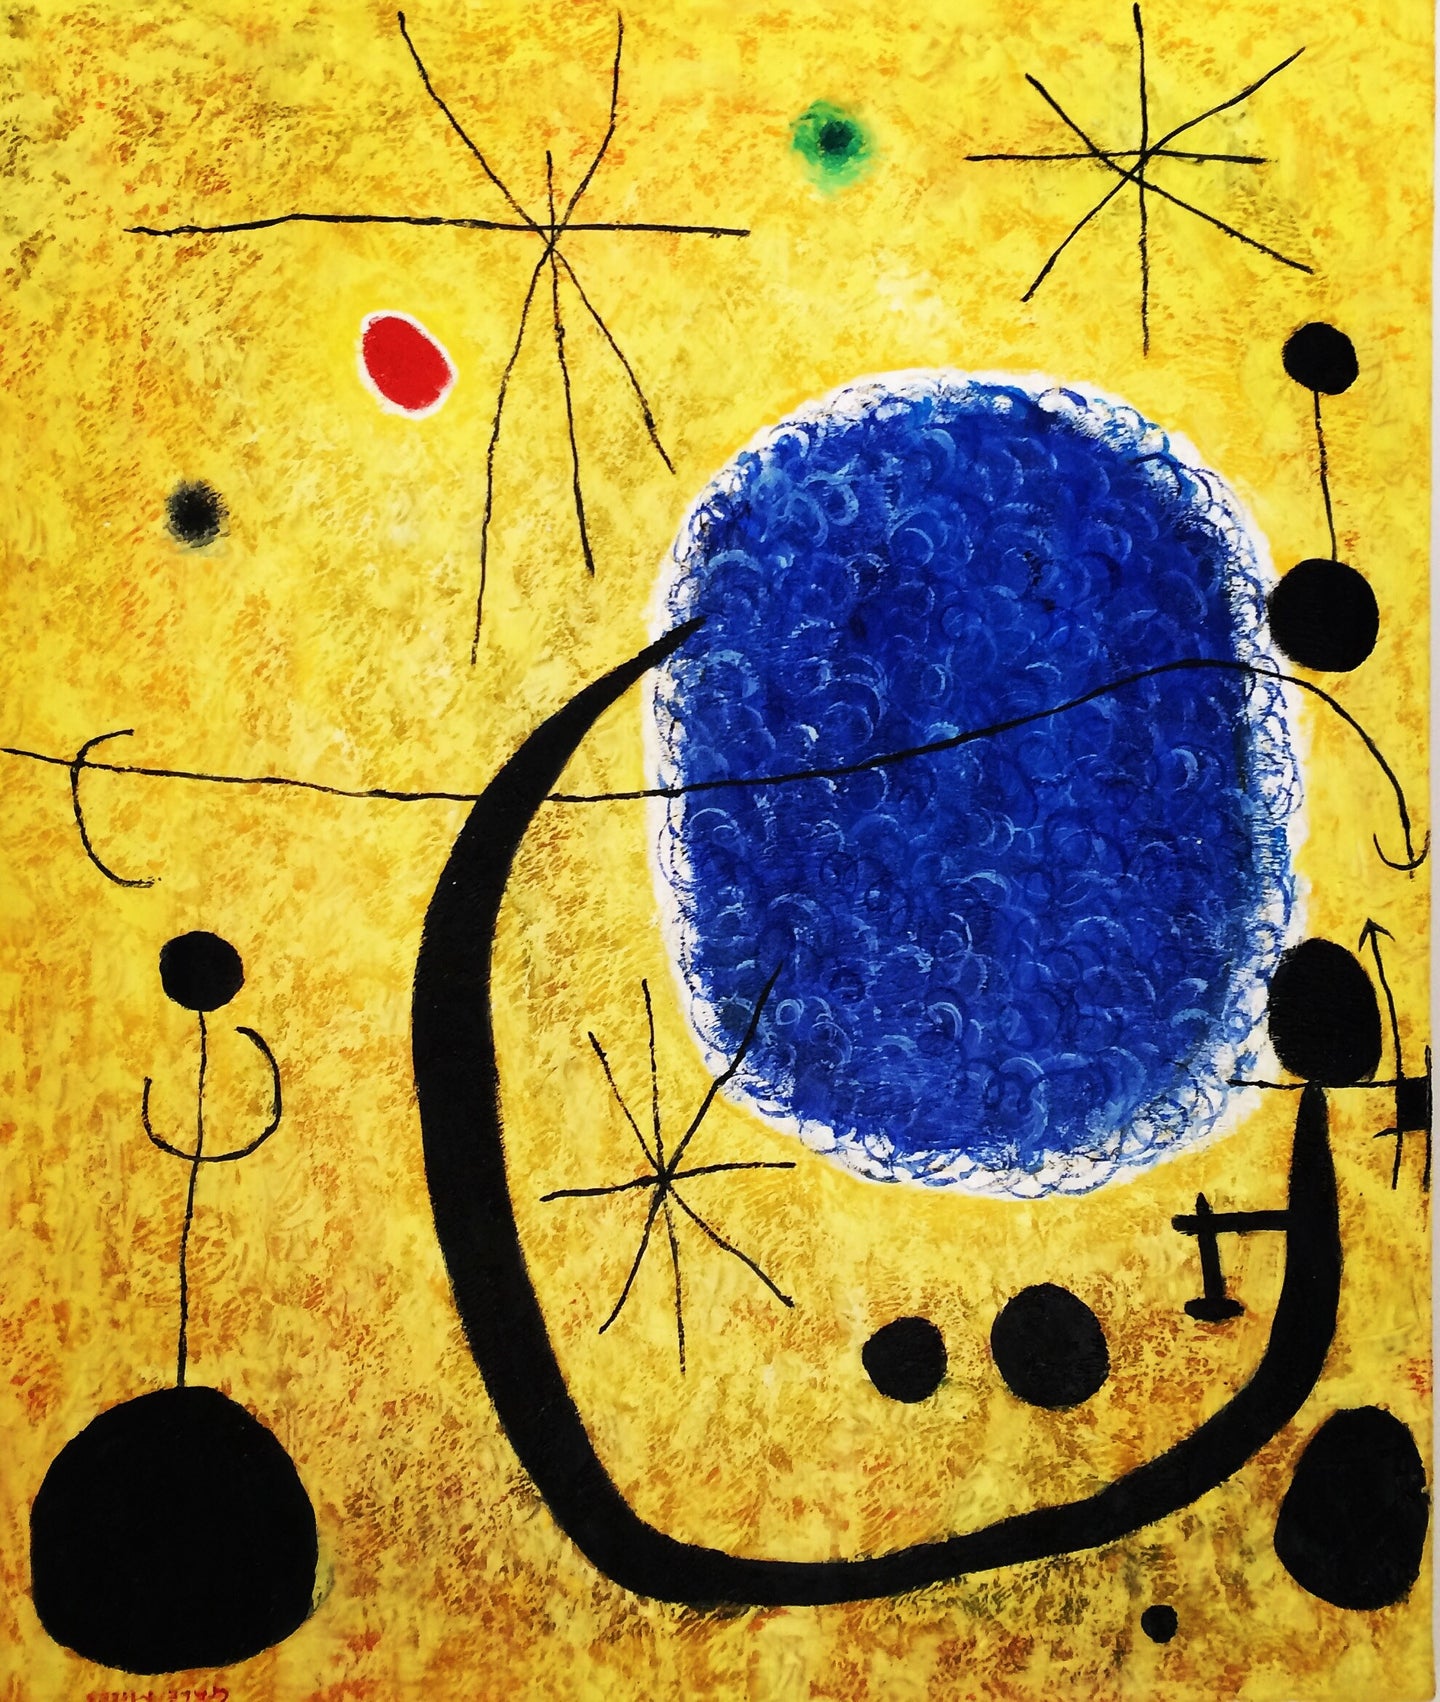 Acrylic on Canvas Painting Signed Gale Miers after Joan Miro